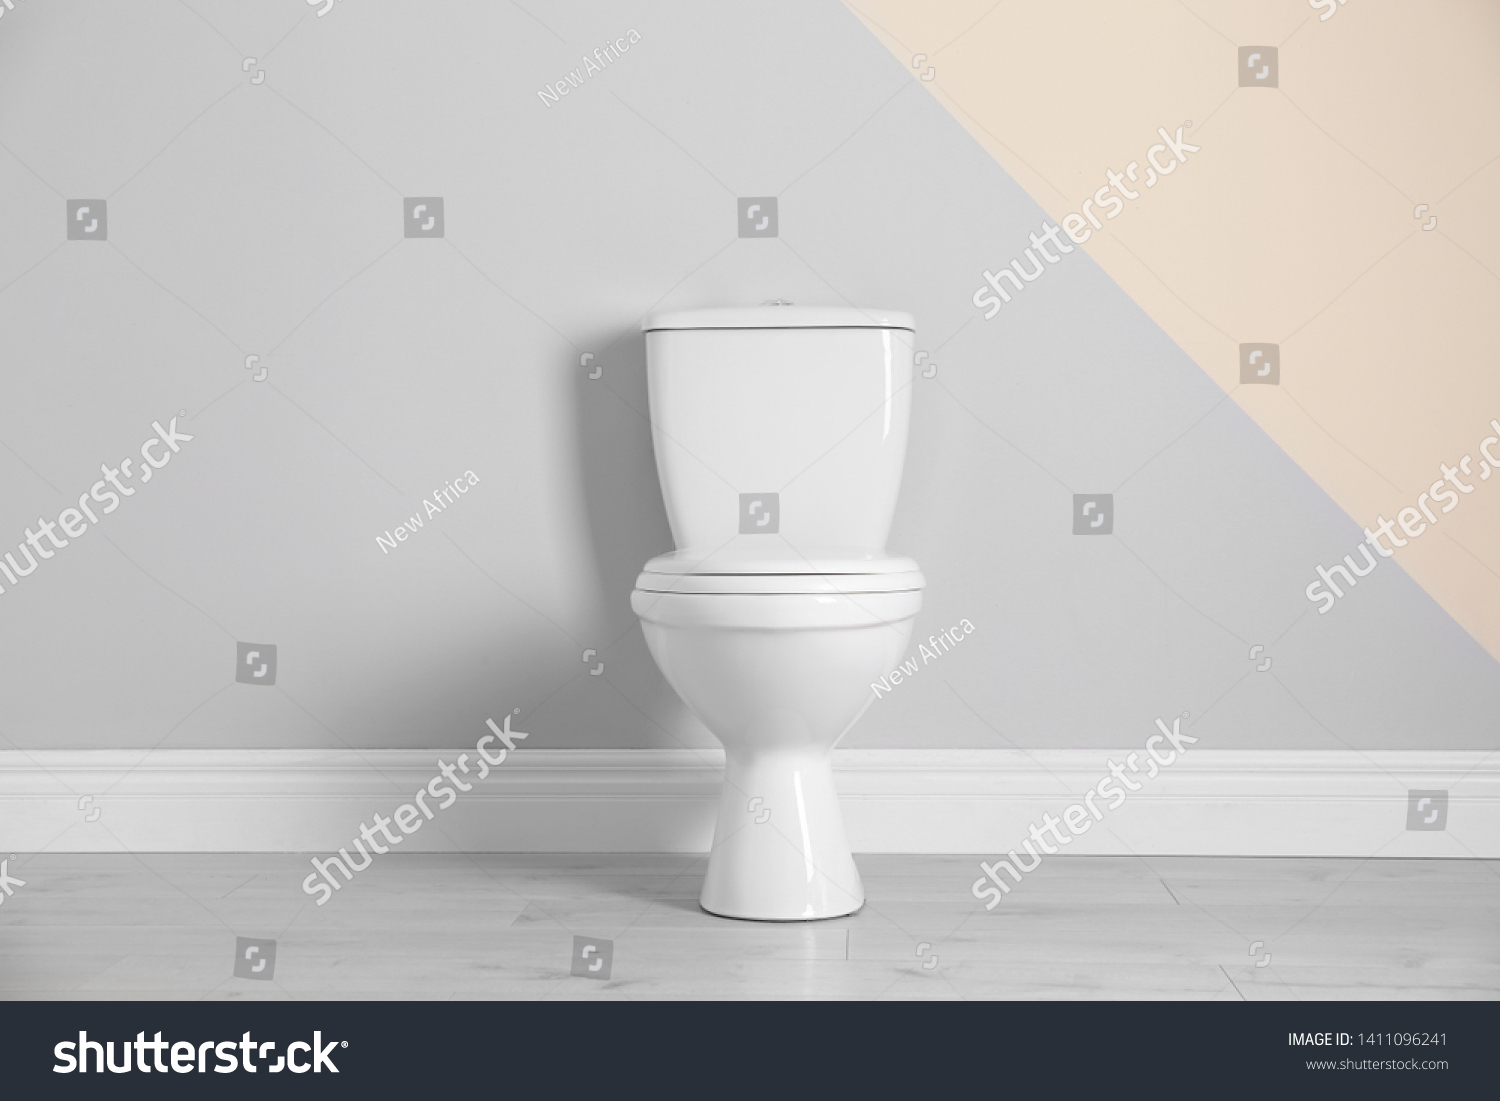 New toilet bowl near color wall indoors #1411096241